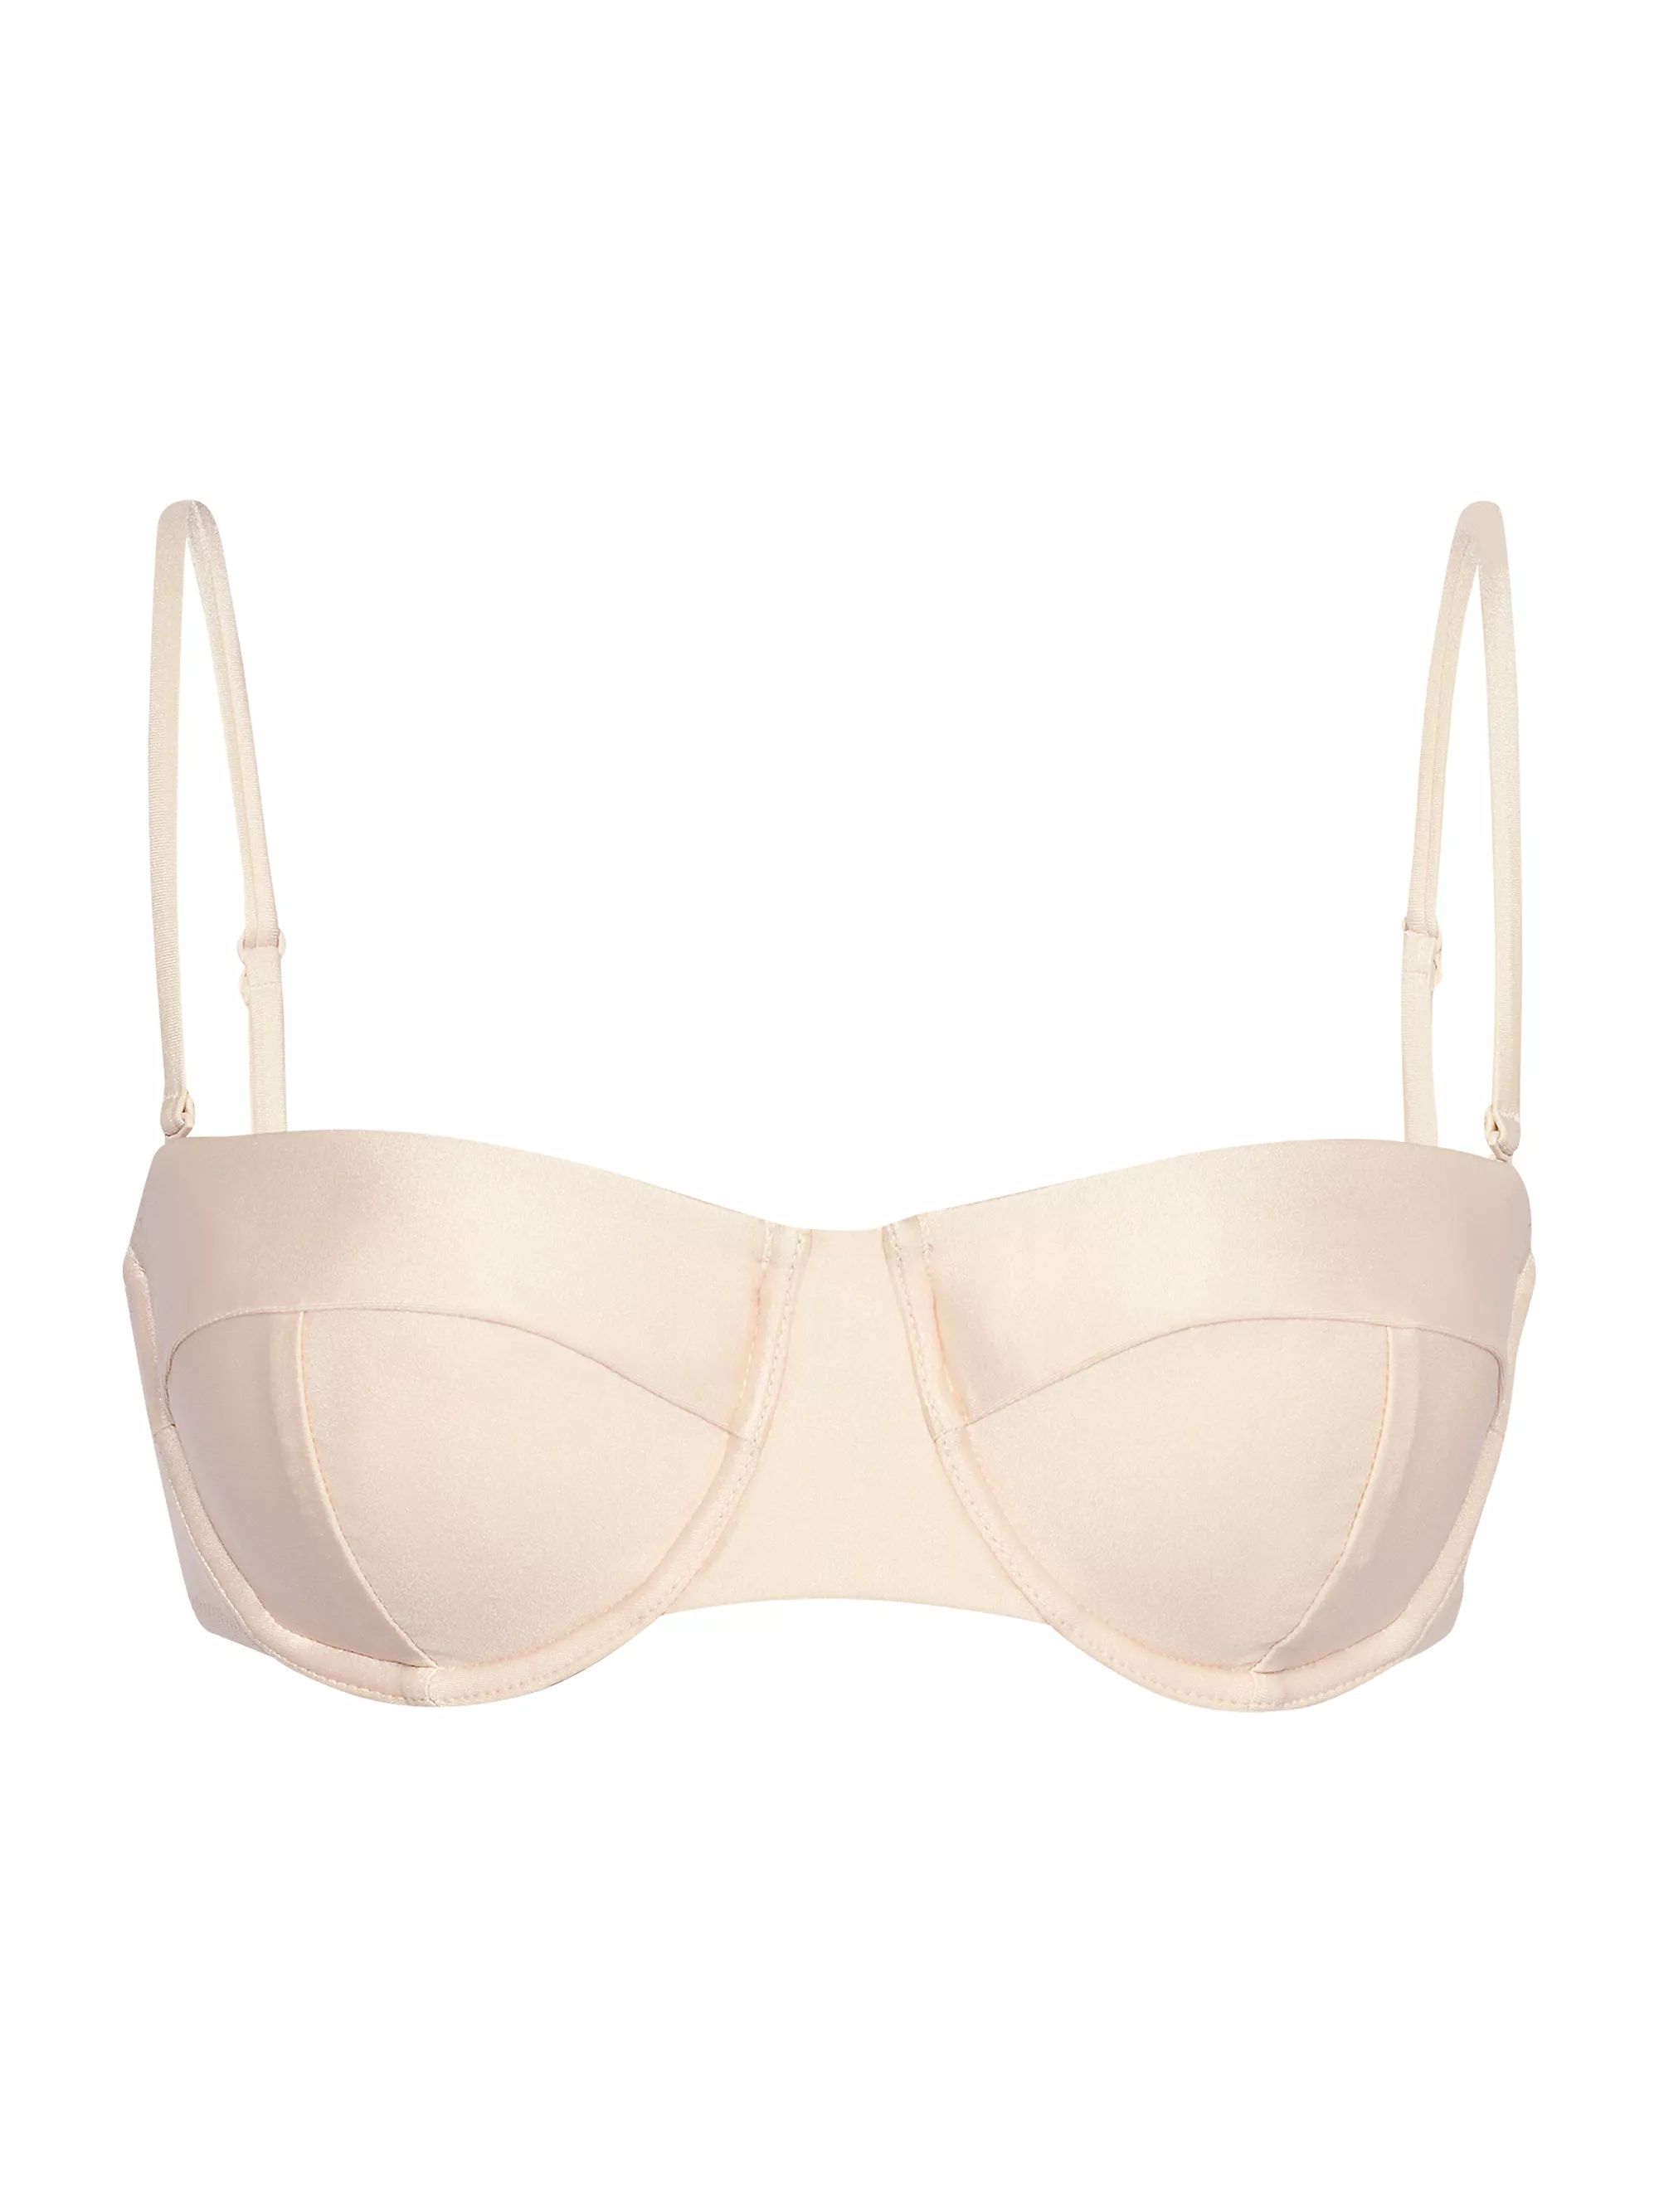 Swimsuits & Beach Cover-UpsTwo-PieceL'AGENCEShimmer Solids Alexandria Underwire Bikini Top$155 | Saks Fifth Avenue